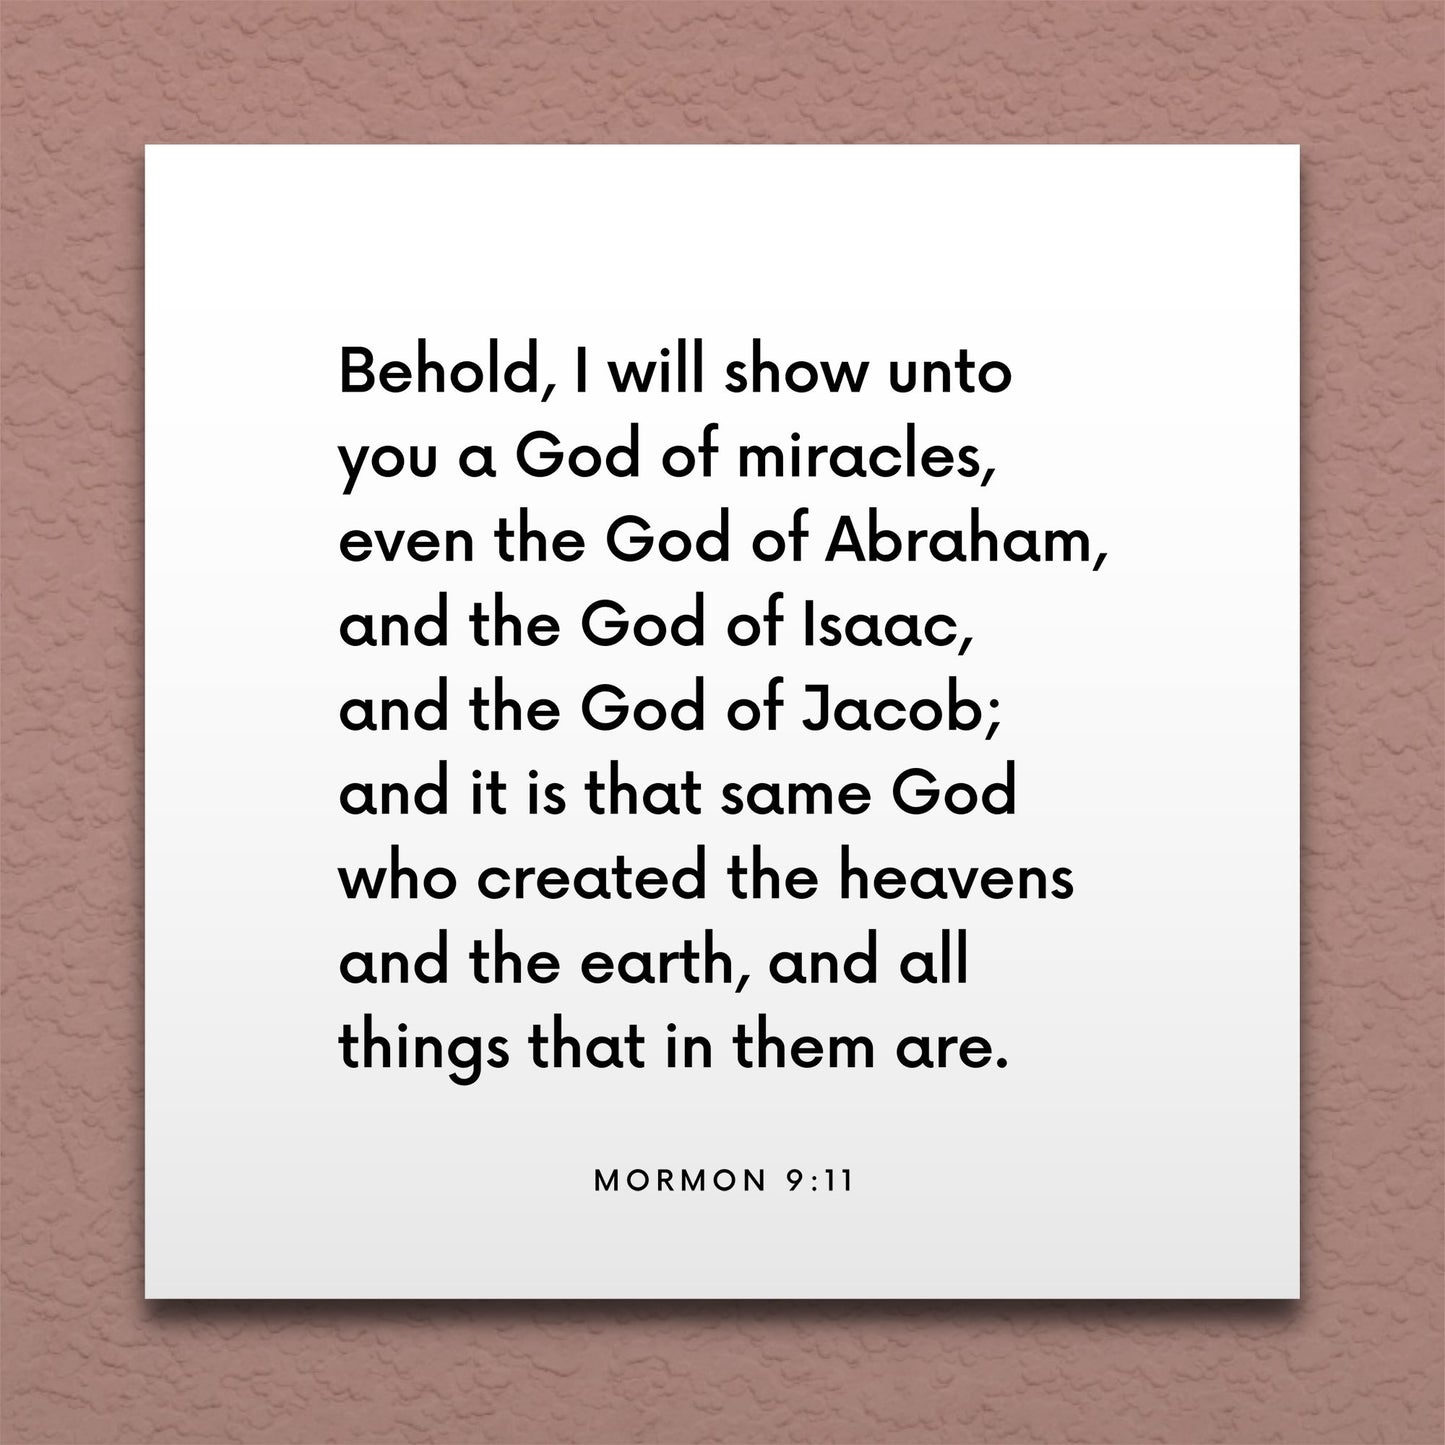 Wall-mounted scripture tile for Mormon 9:11 - "I will show unto you a God of miracles"